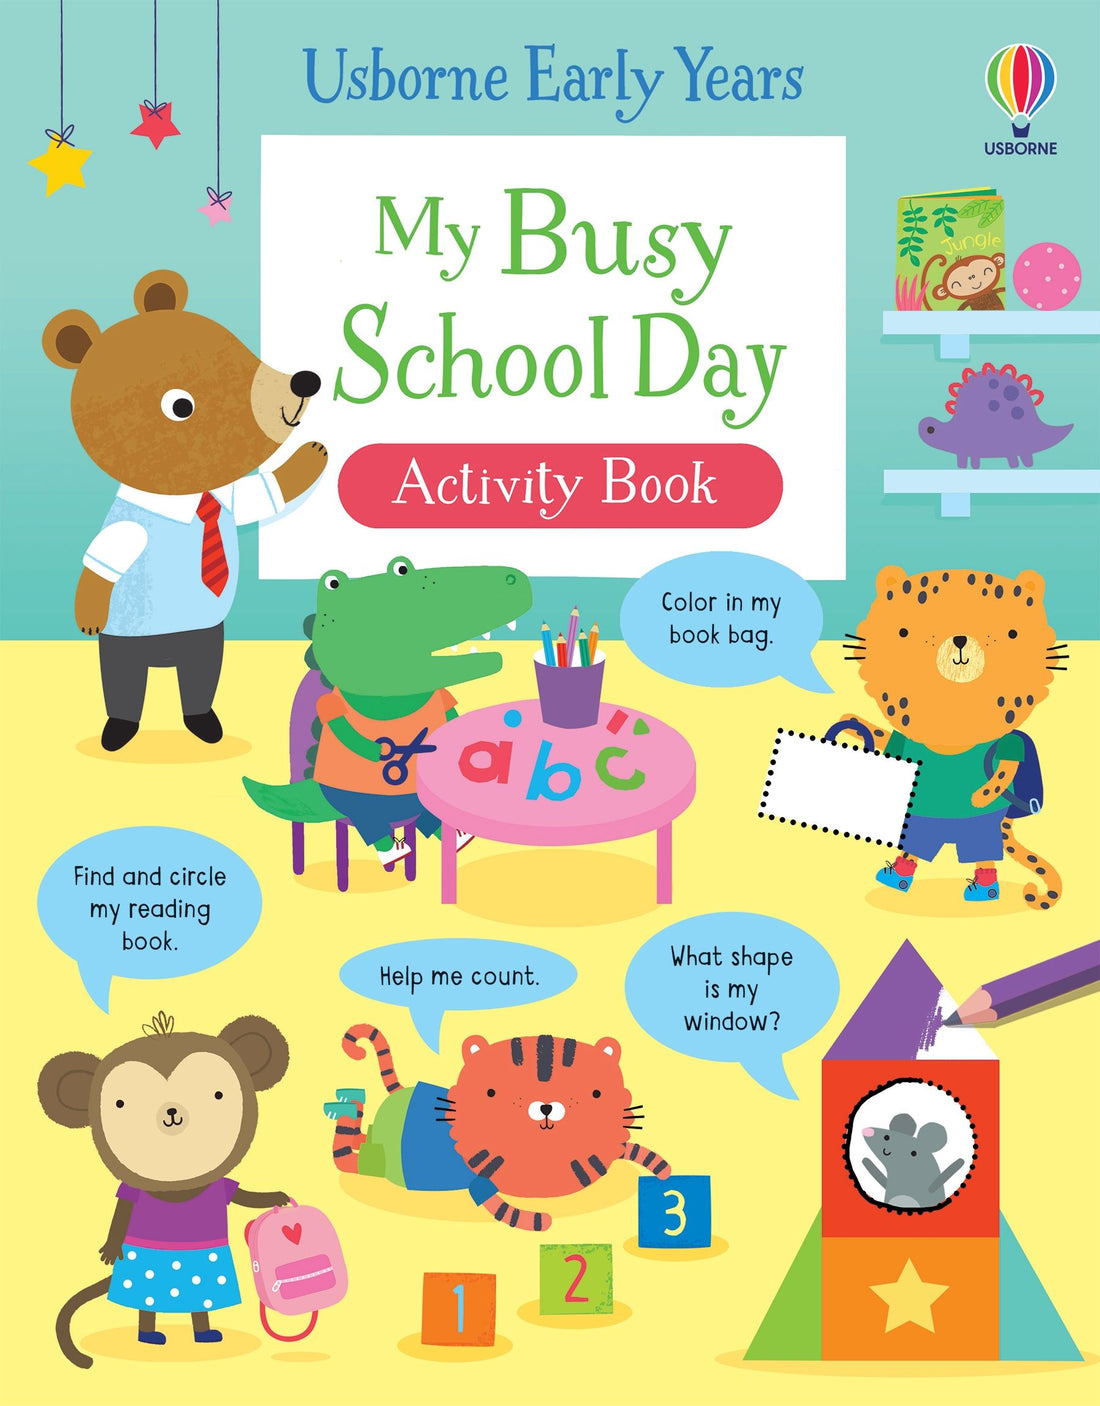 My Busy School Day Activity Book